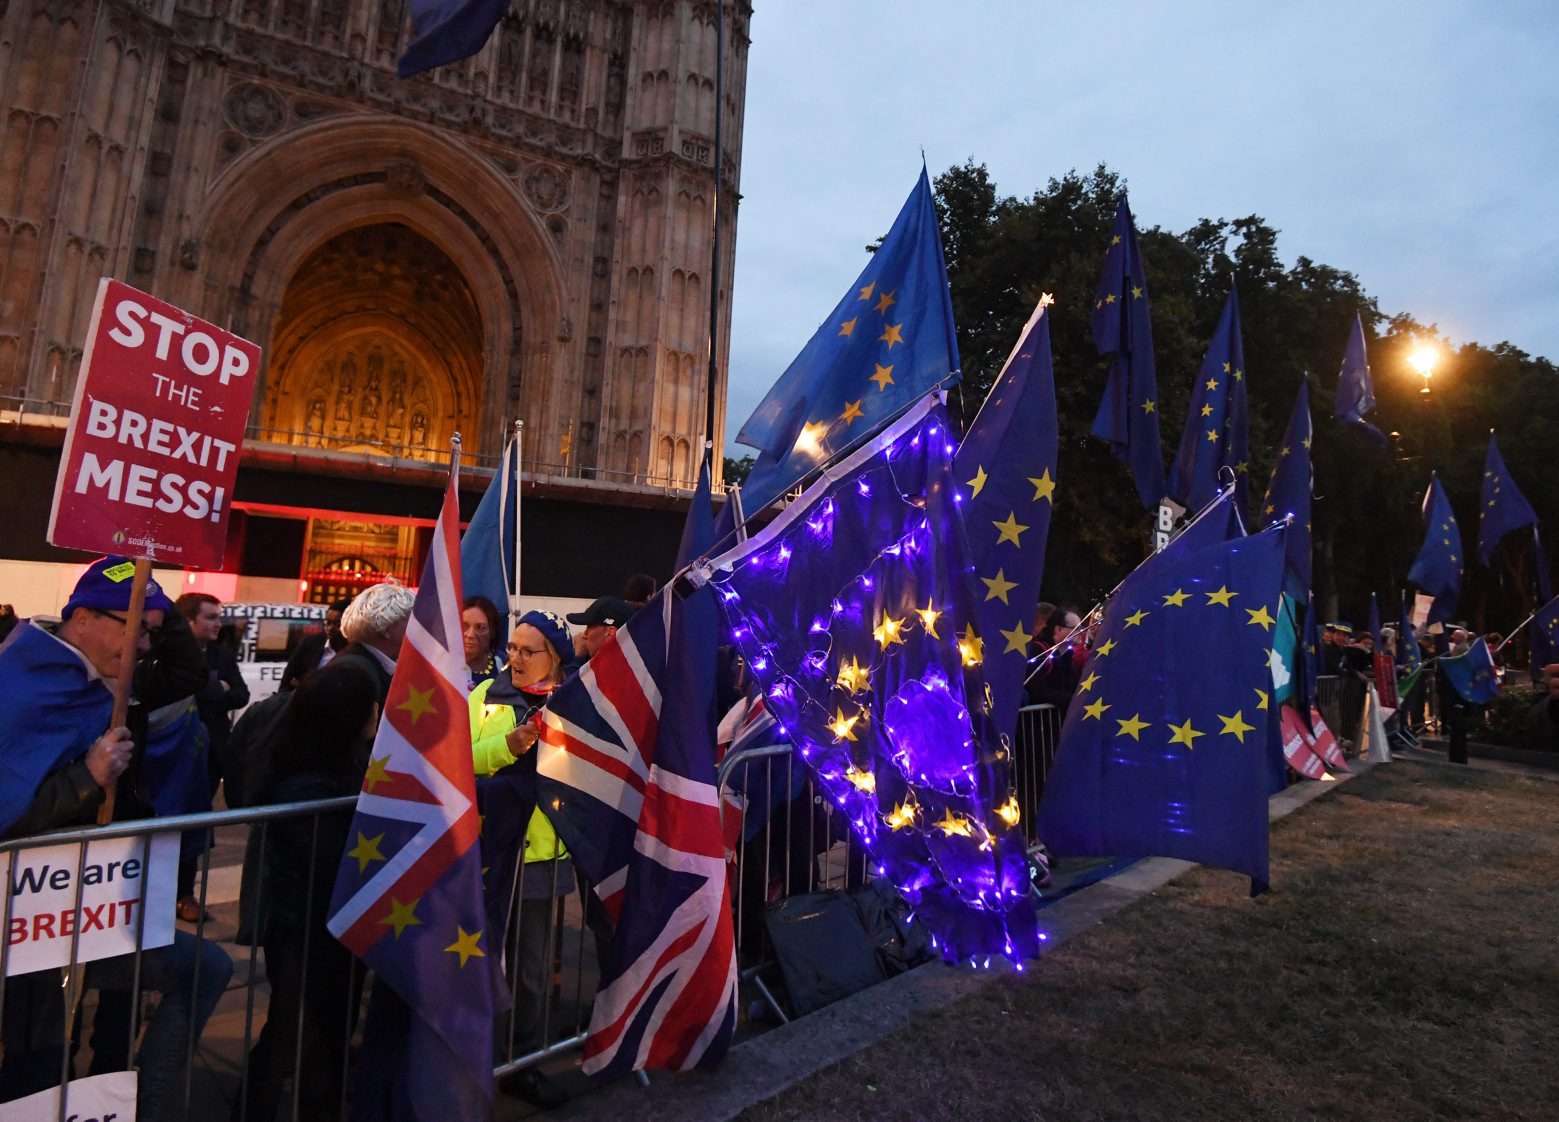 epa07830882 Anti Brexit protesters stand outside the Houses of Parliament in London, Britain, 09 September 2019. Britain's Prime Minister Boris Johnson will put forward a vote in Parliament later in the day where Members of Parliament will be asked to vote for an early snap election. Then after Parliamentary business on 09 September 2019 the five-week suspension of Parliament will begin and only resume on 14 October 2019.  EPA/FACUNDO ARRIZABALAGA BRITAIN POLITCS BREXIT PROTESTS